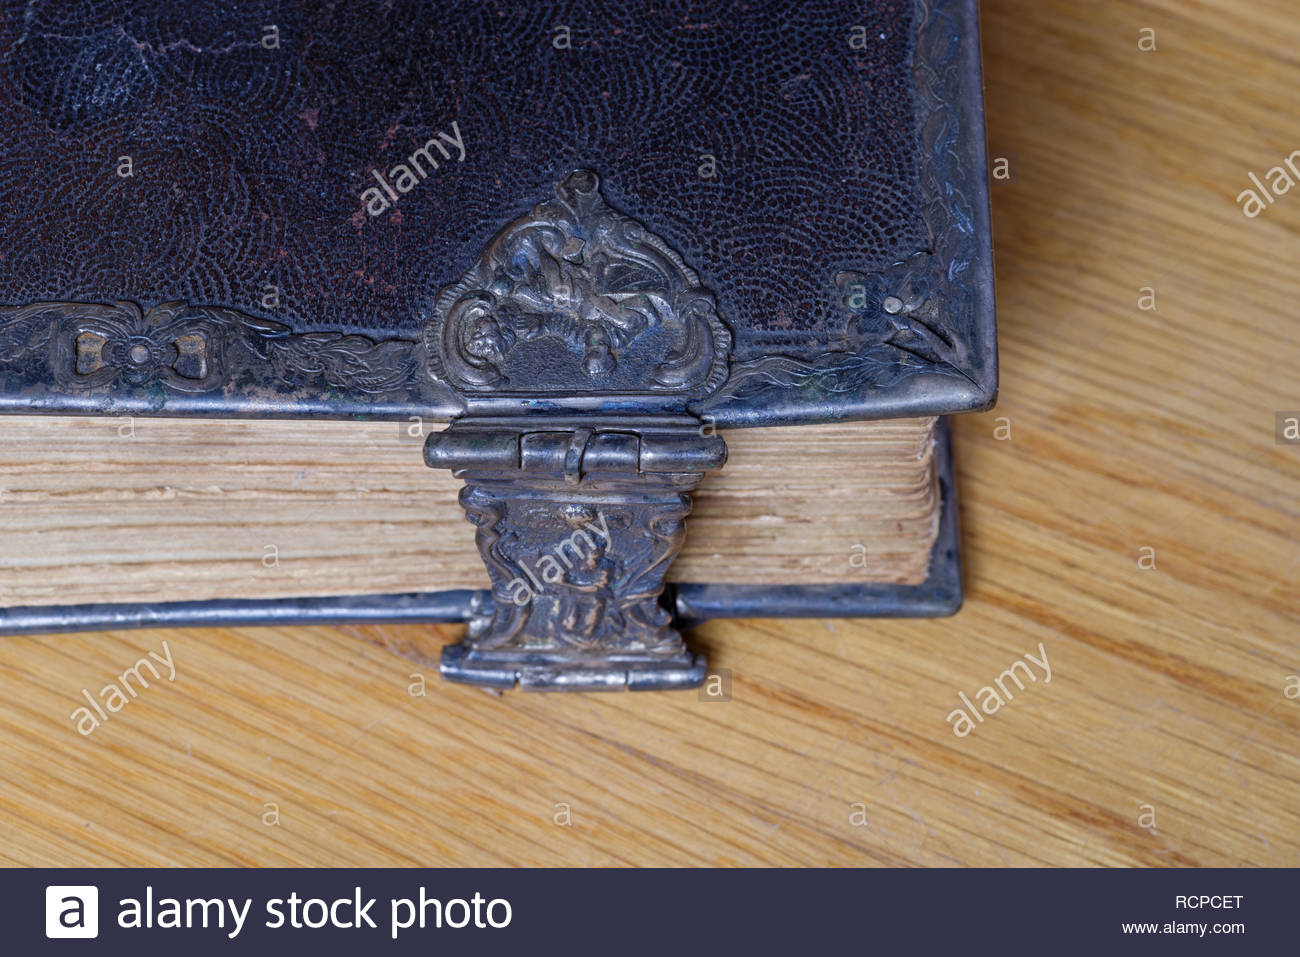 corner-of-old-bible-with-metal-clasp-on-wood-RCPCET.jpg